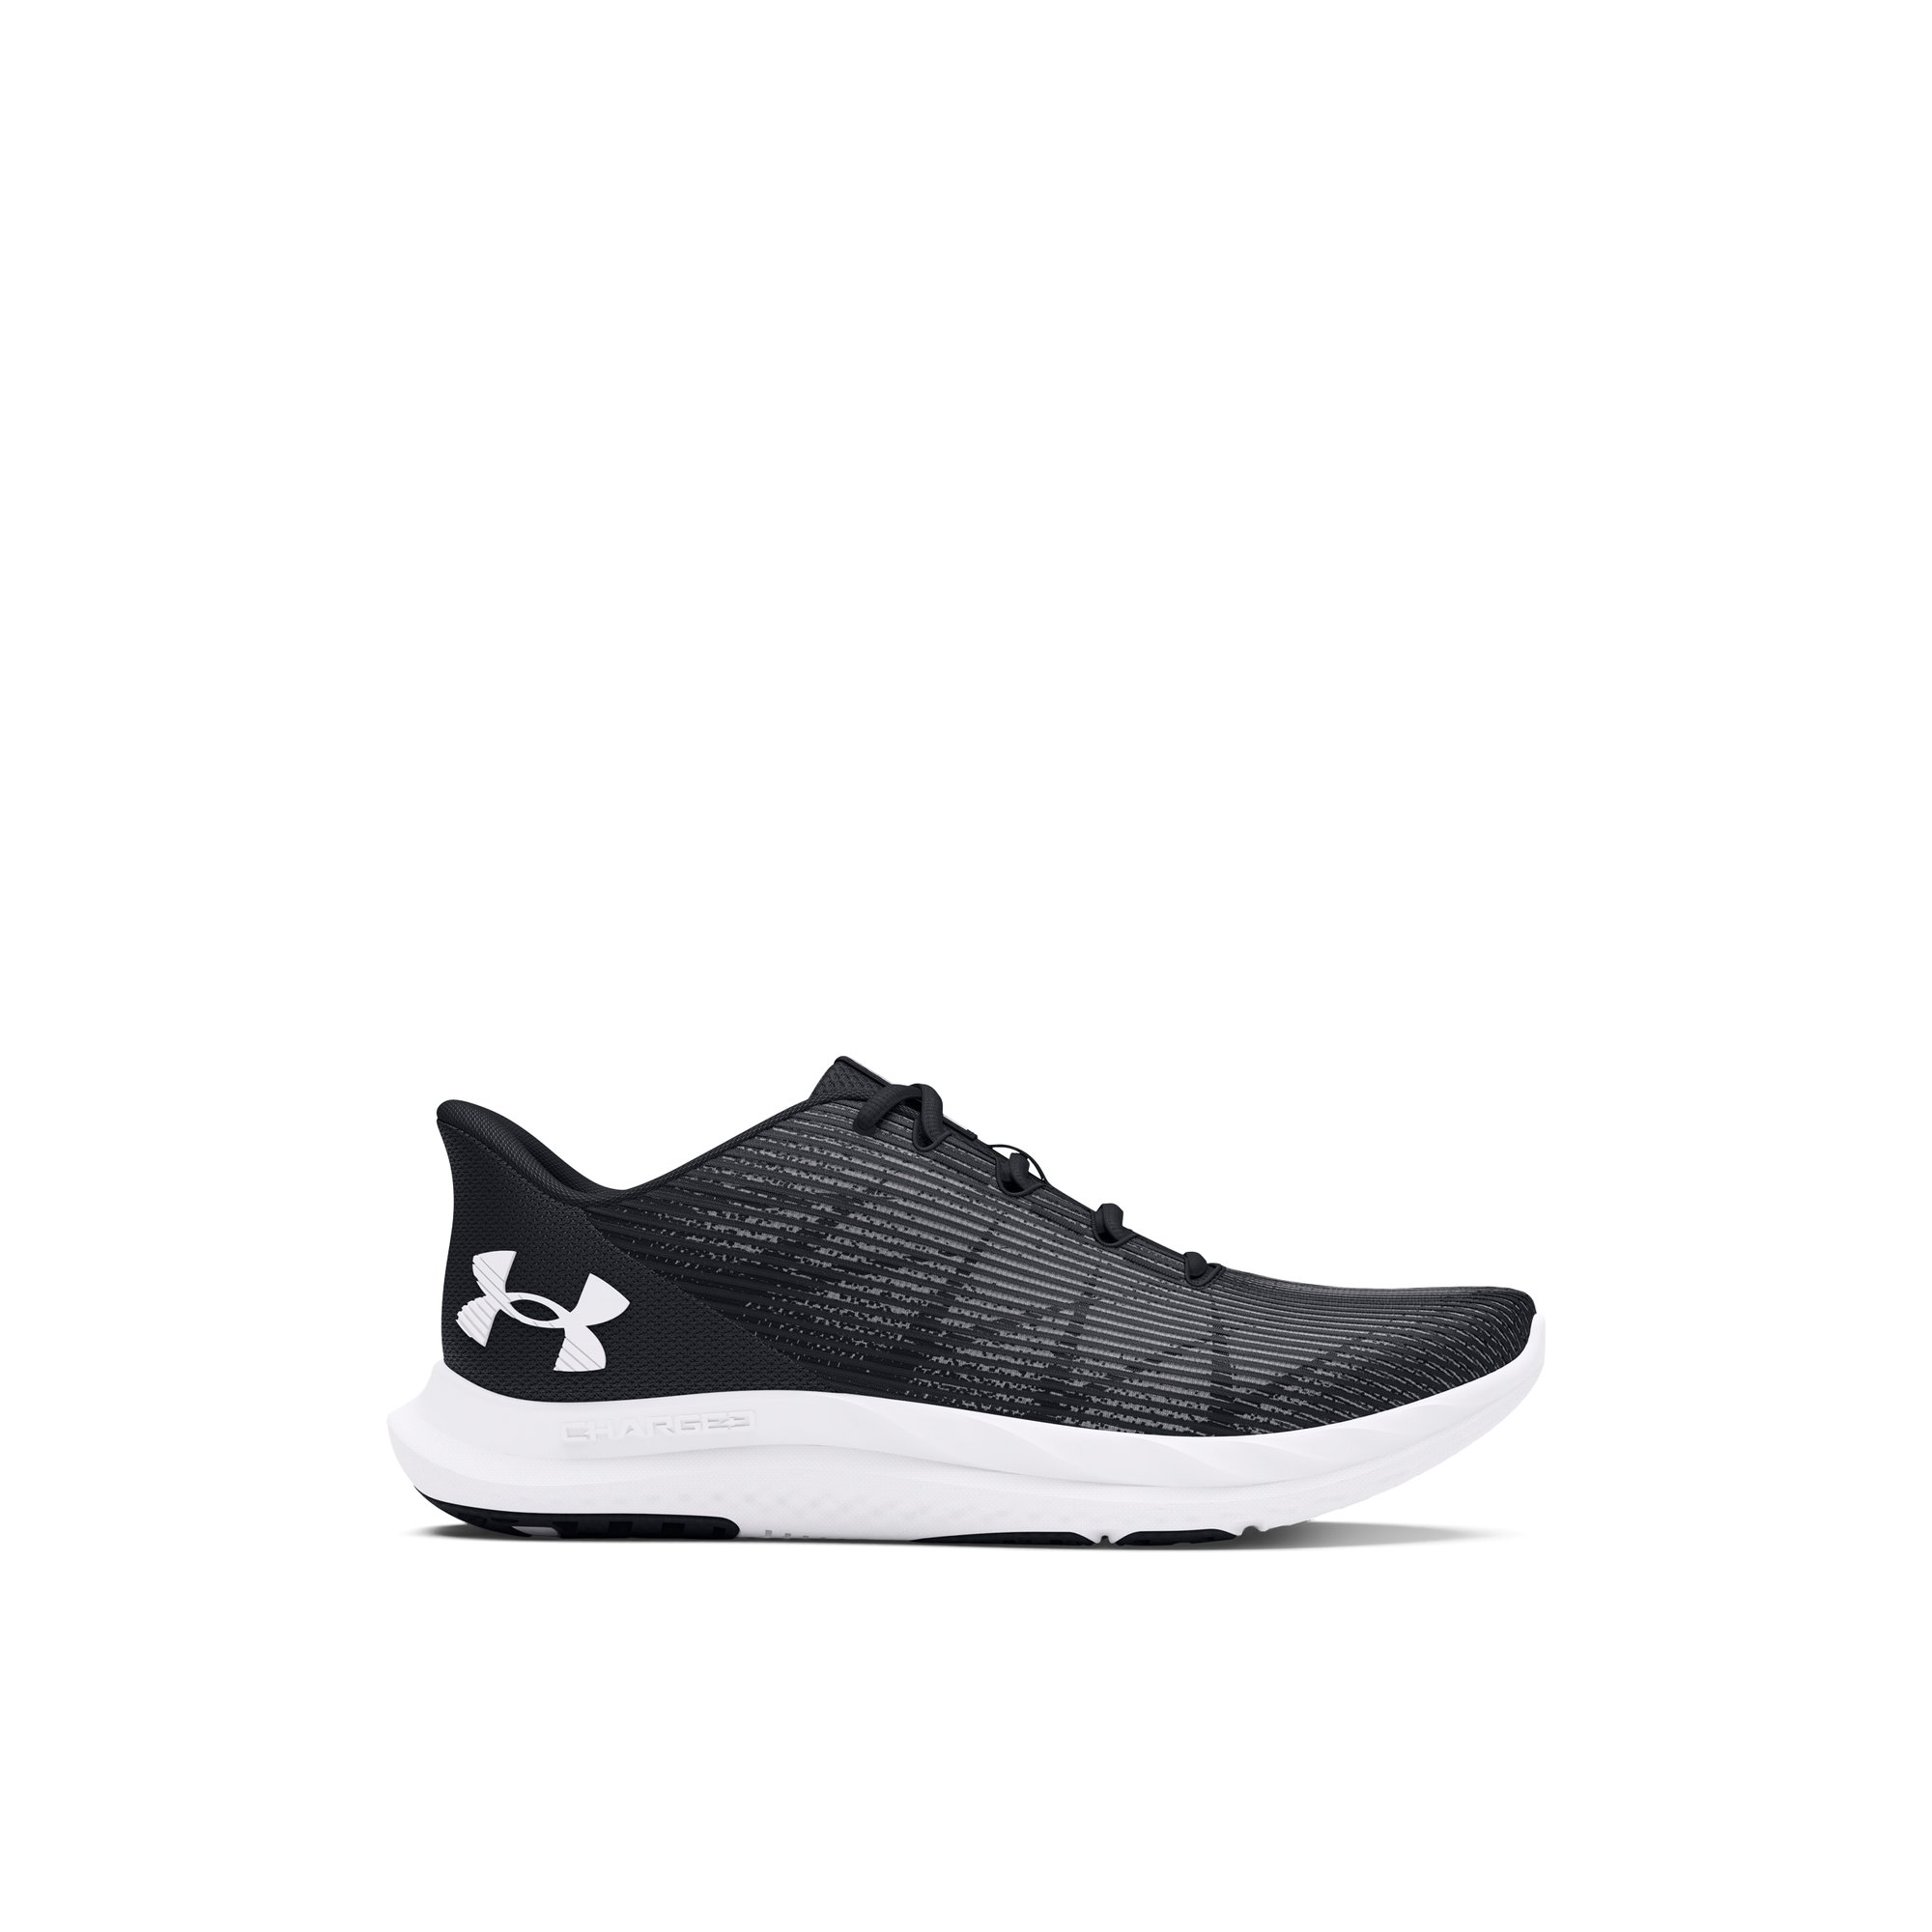 Under Armour Charge Speed sw - Women's Shoes Black